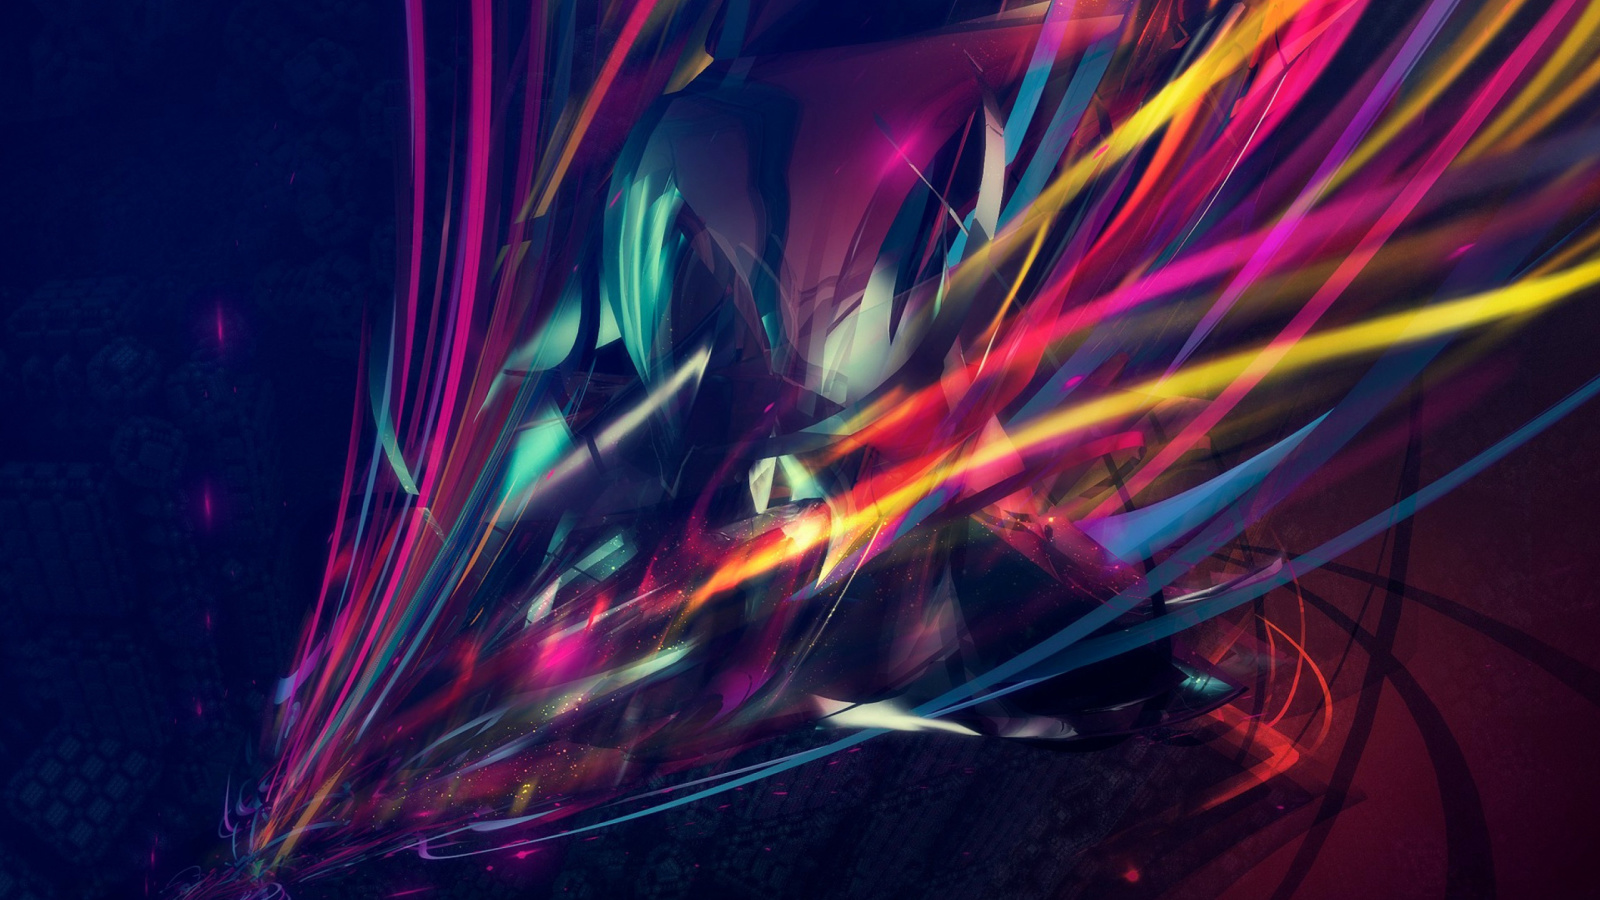 Das 3D Colorful Abstract Wallpaper 1600x900